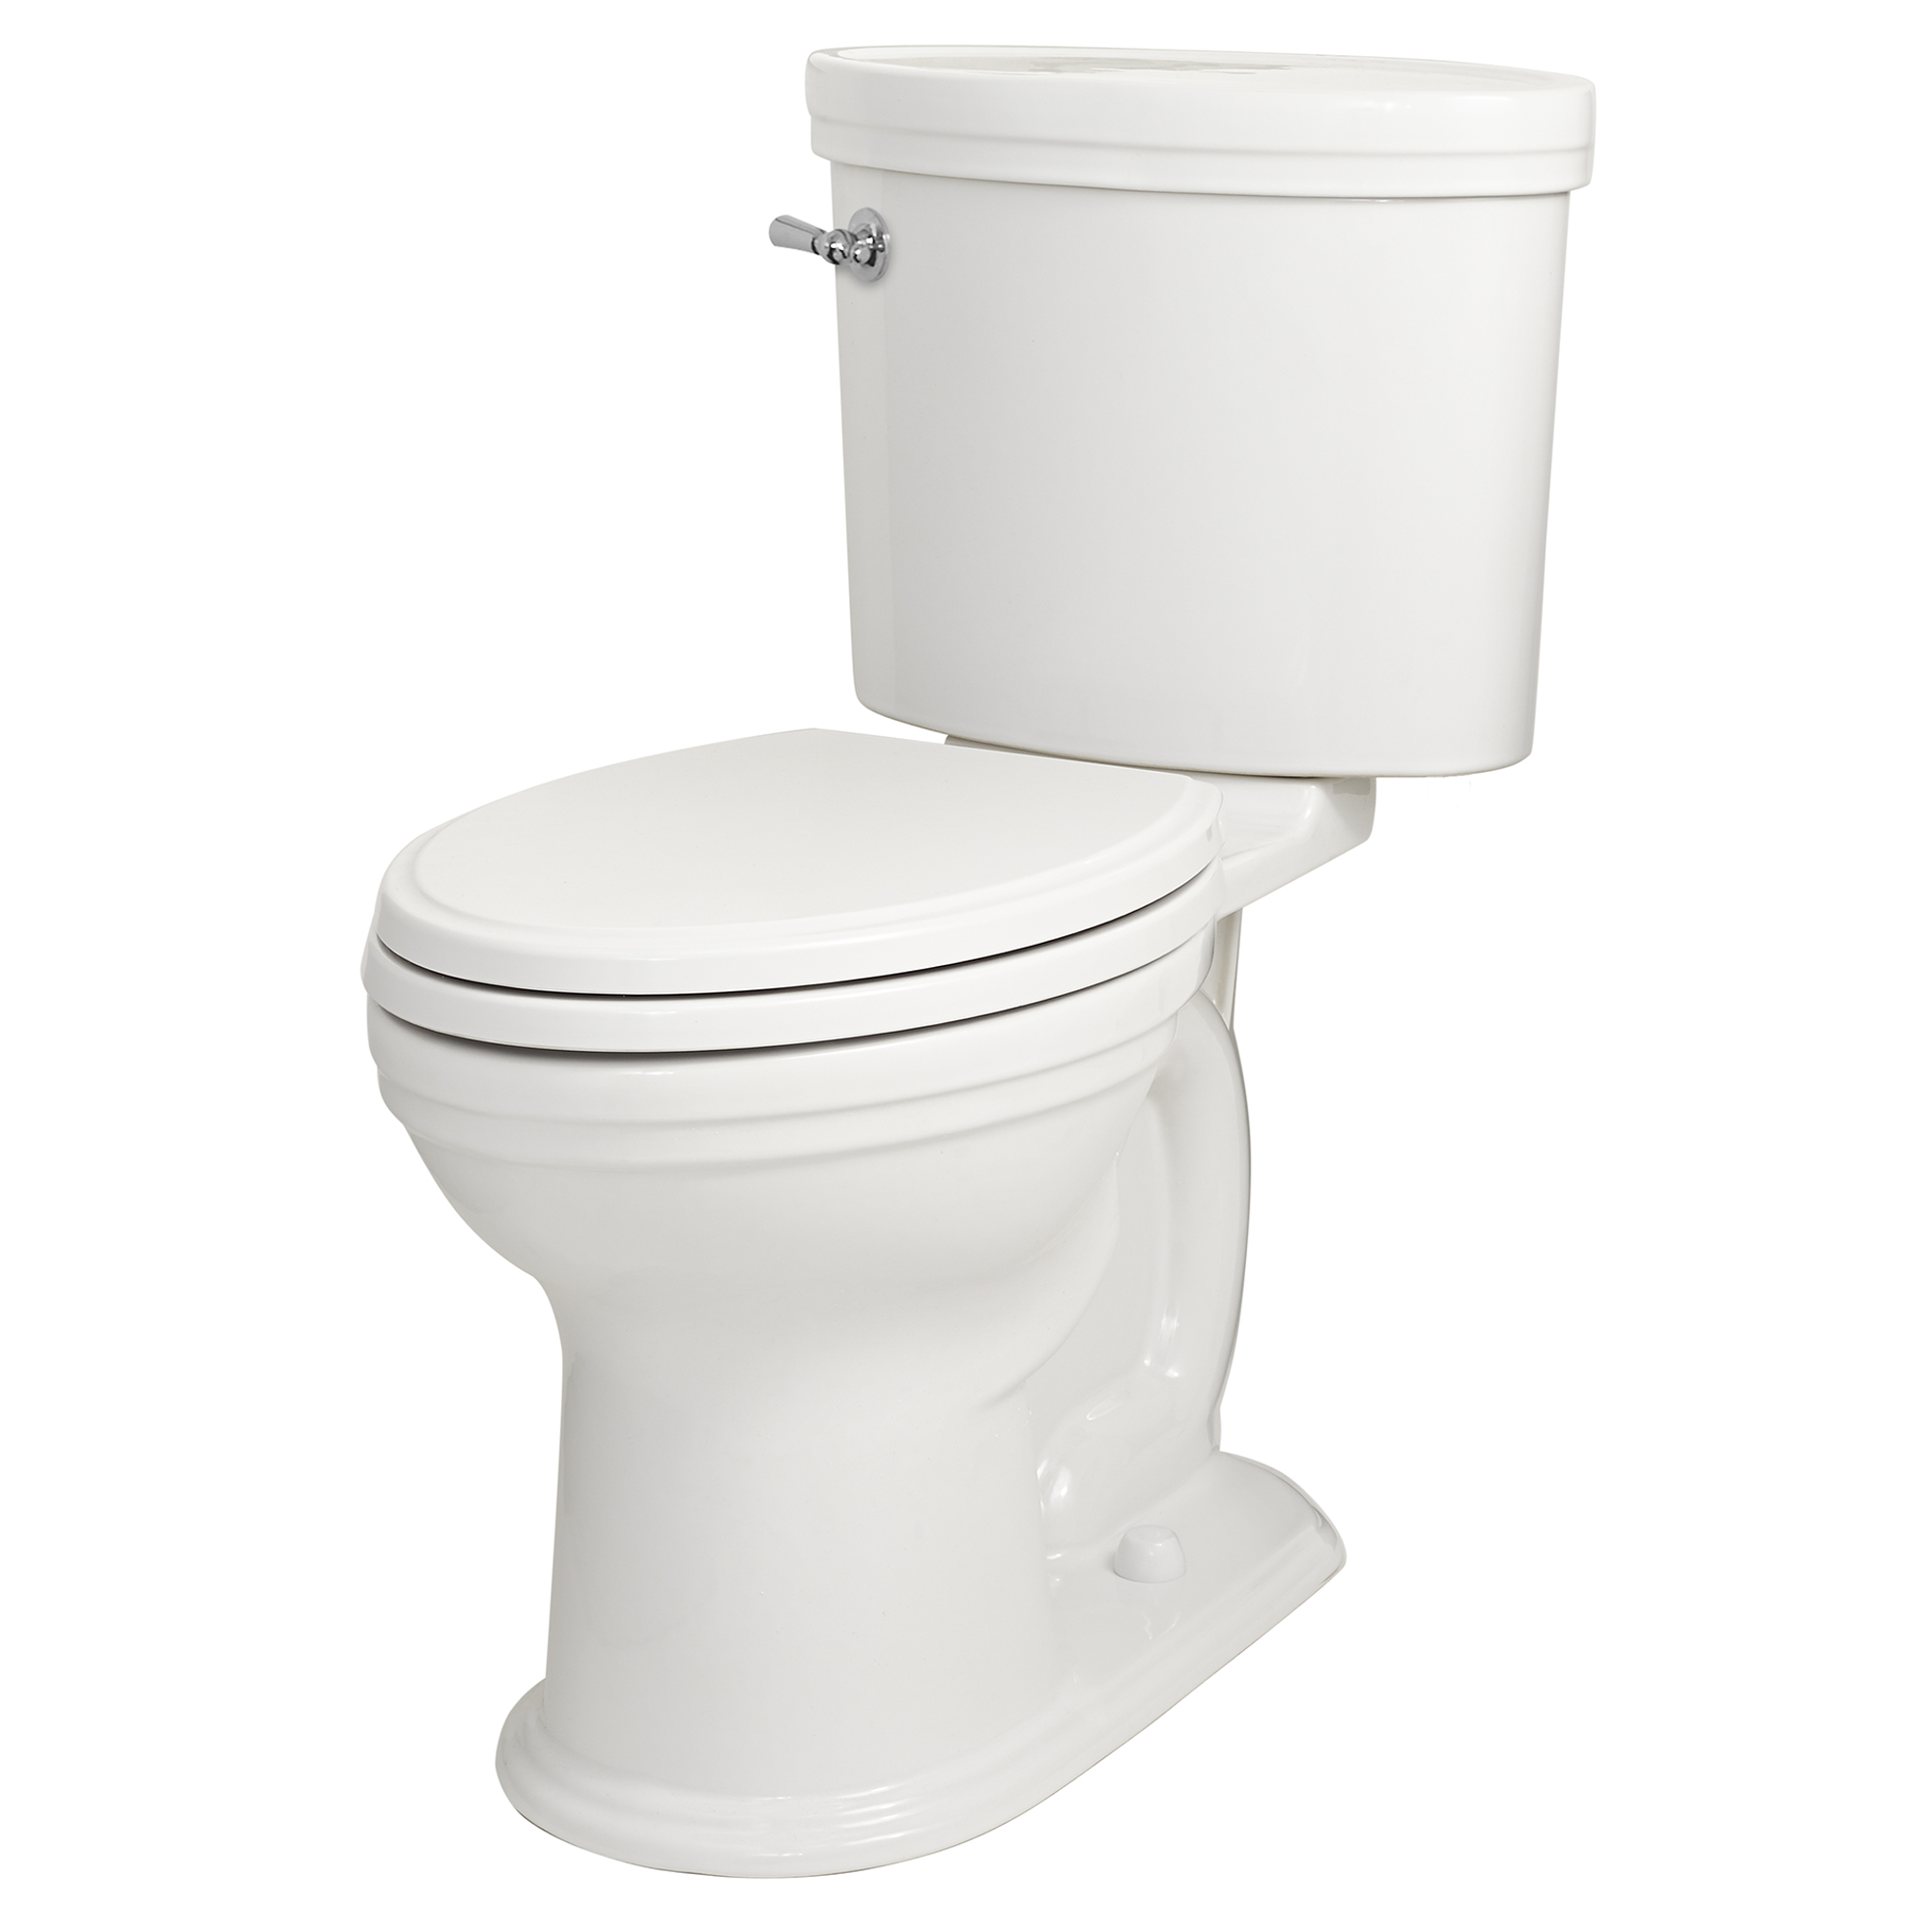 Saint George Two-Piece Chair Height Elongated Toilet with Seat